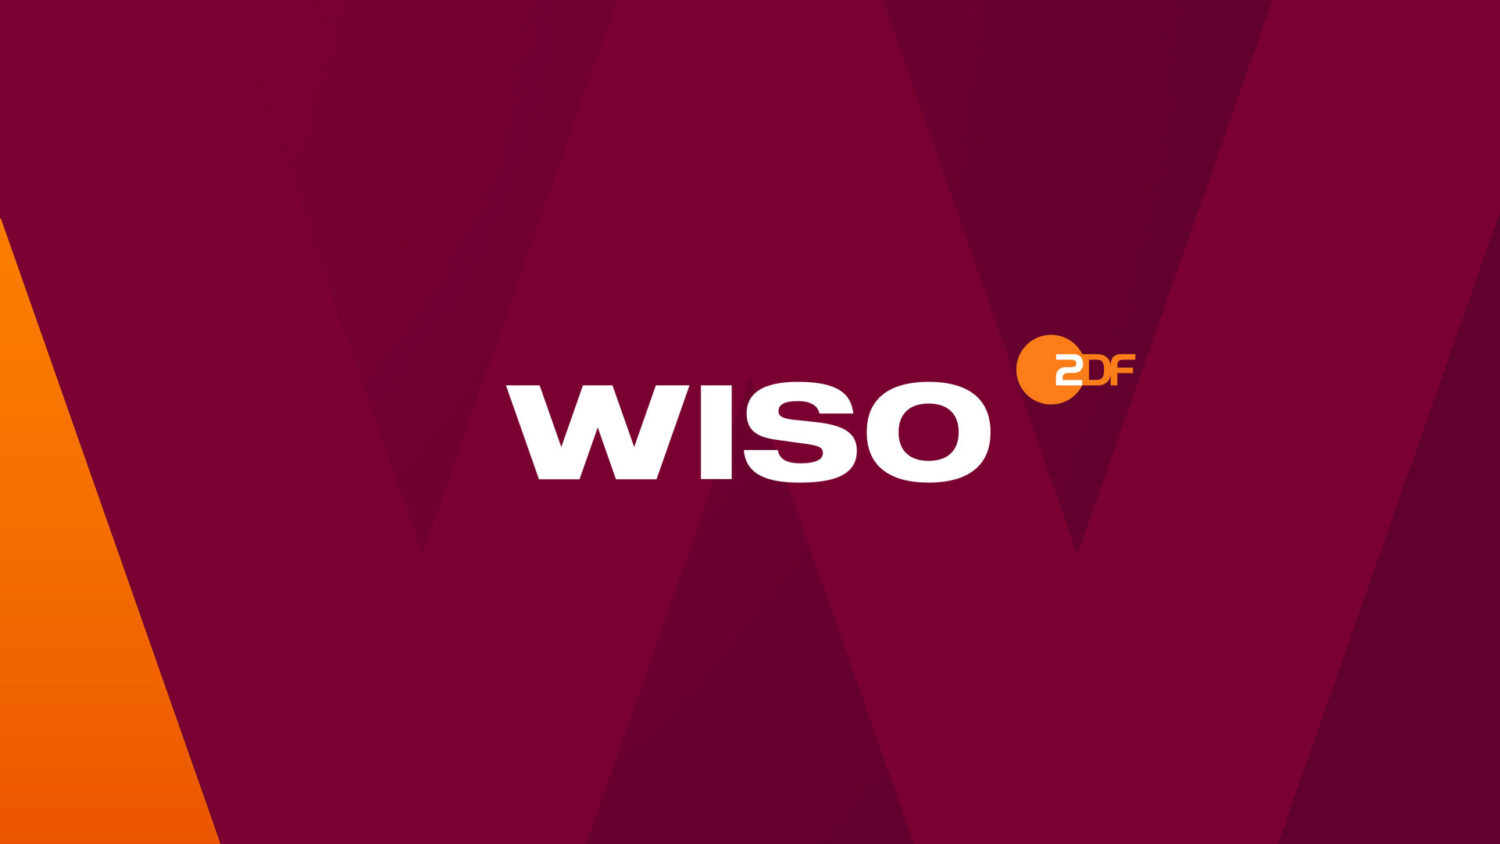 ZDF WISO On-Air-Design